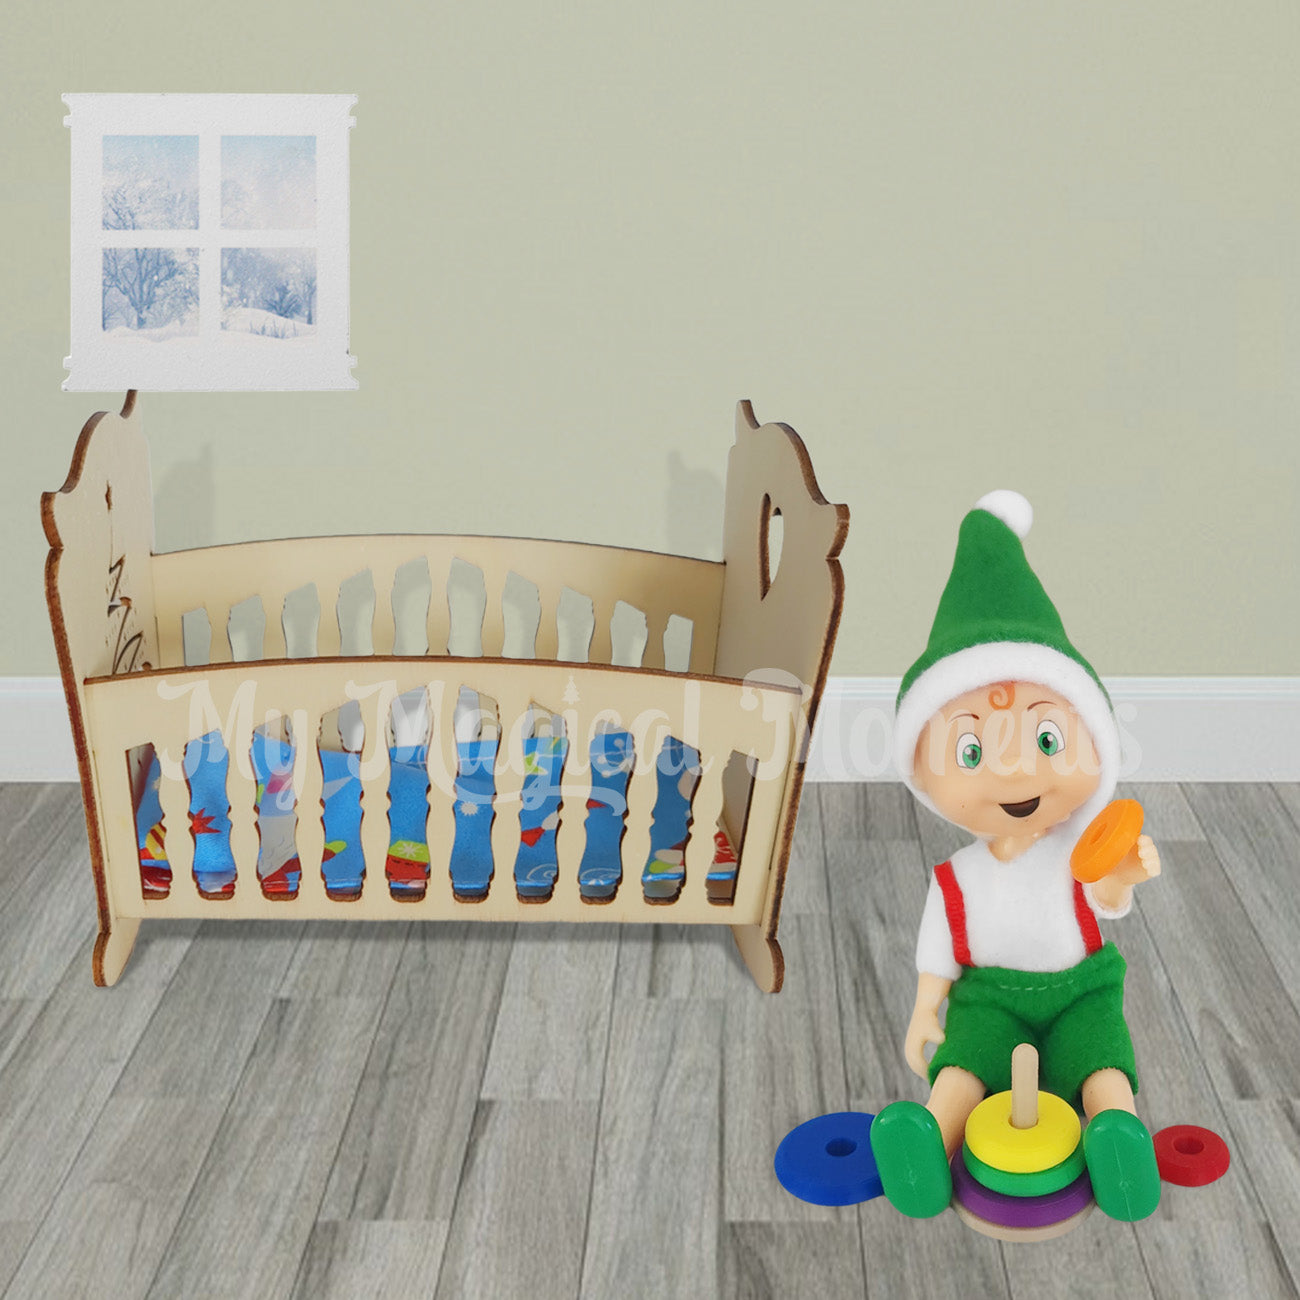 Elf toddler playing with mini ring stacker toy in room with cot